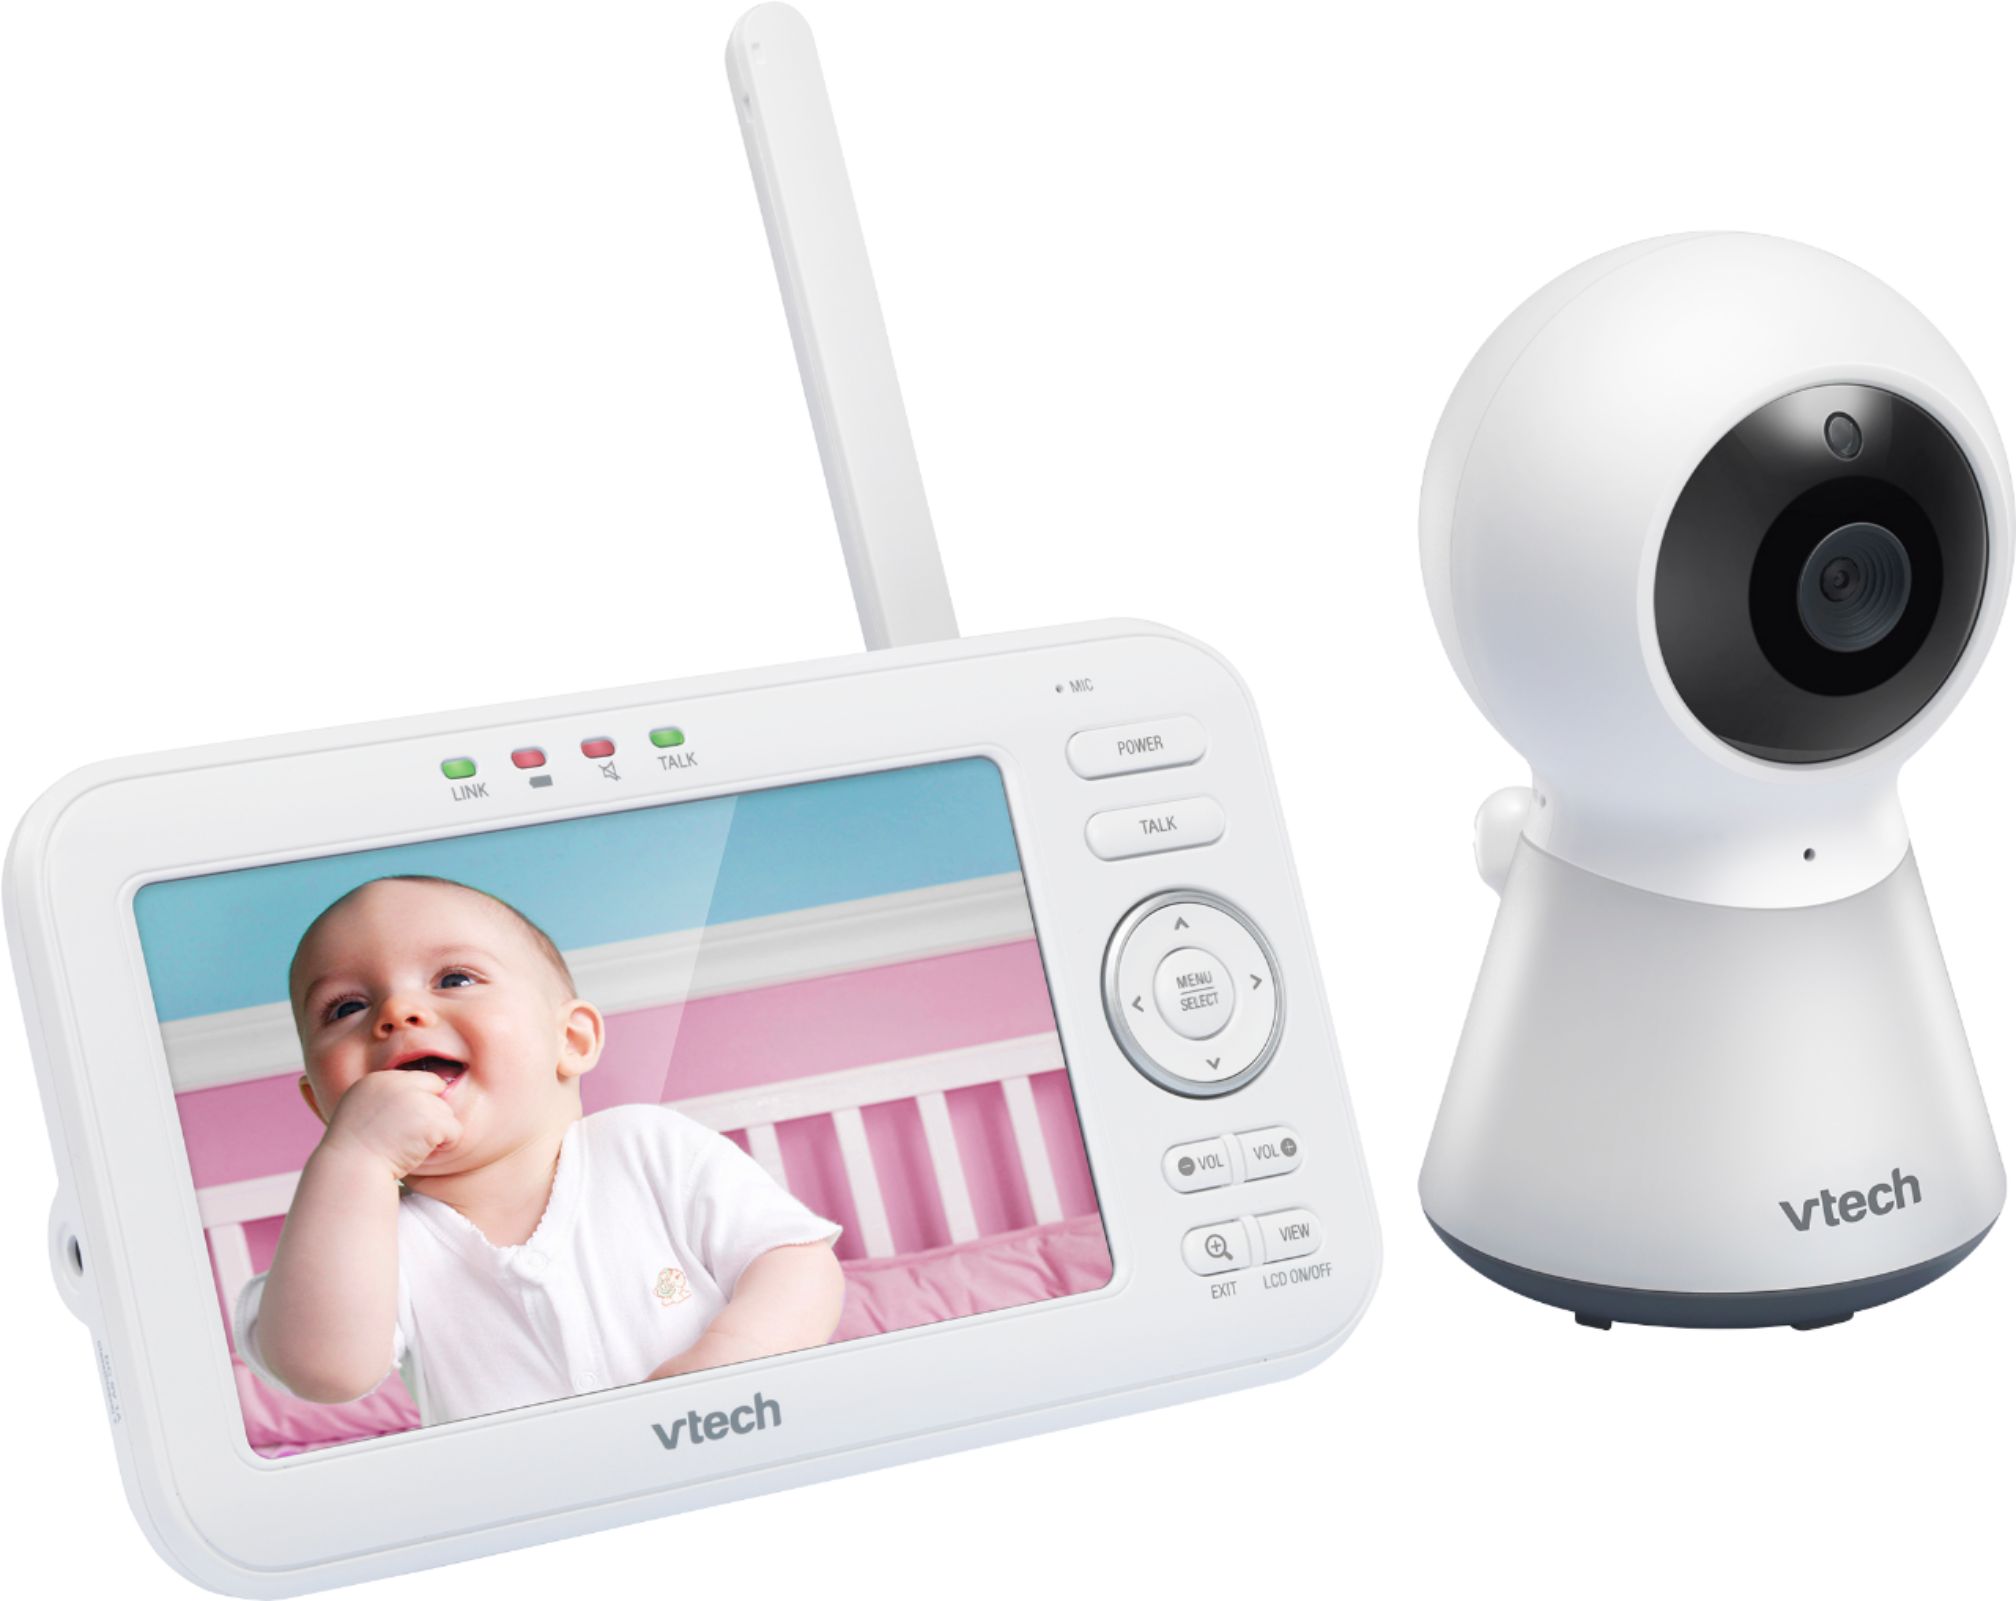 5 Inch Wireles Baby Monitor Babyphone Security Video Camera